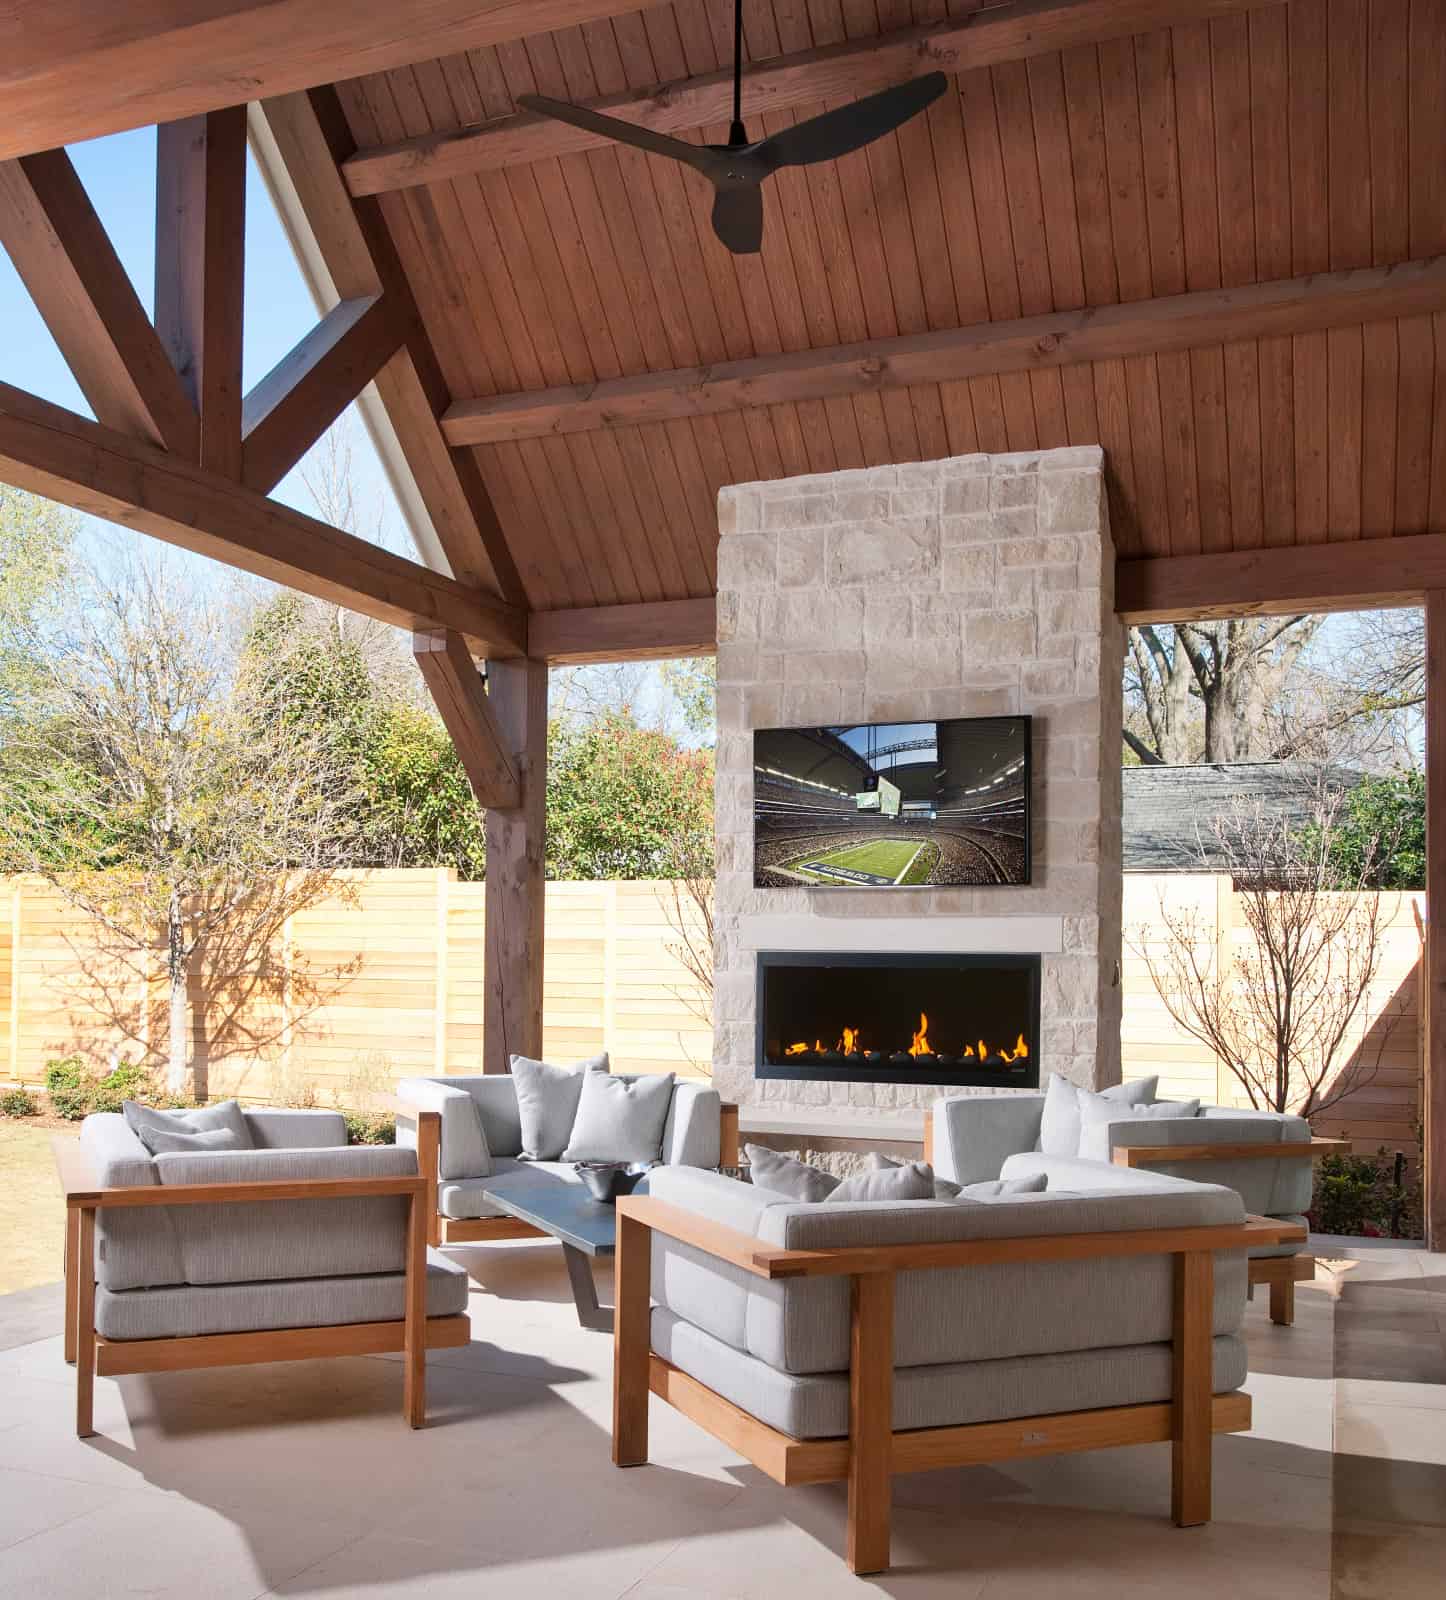 Outdoor Fireplace With Tv, Pictures Of Outdoor Fireplaces With Tv